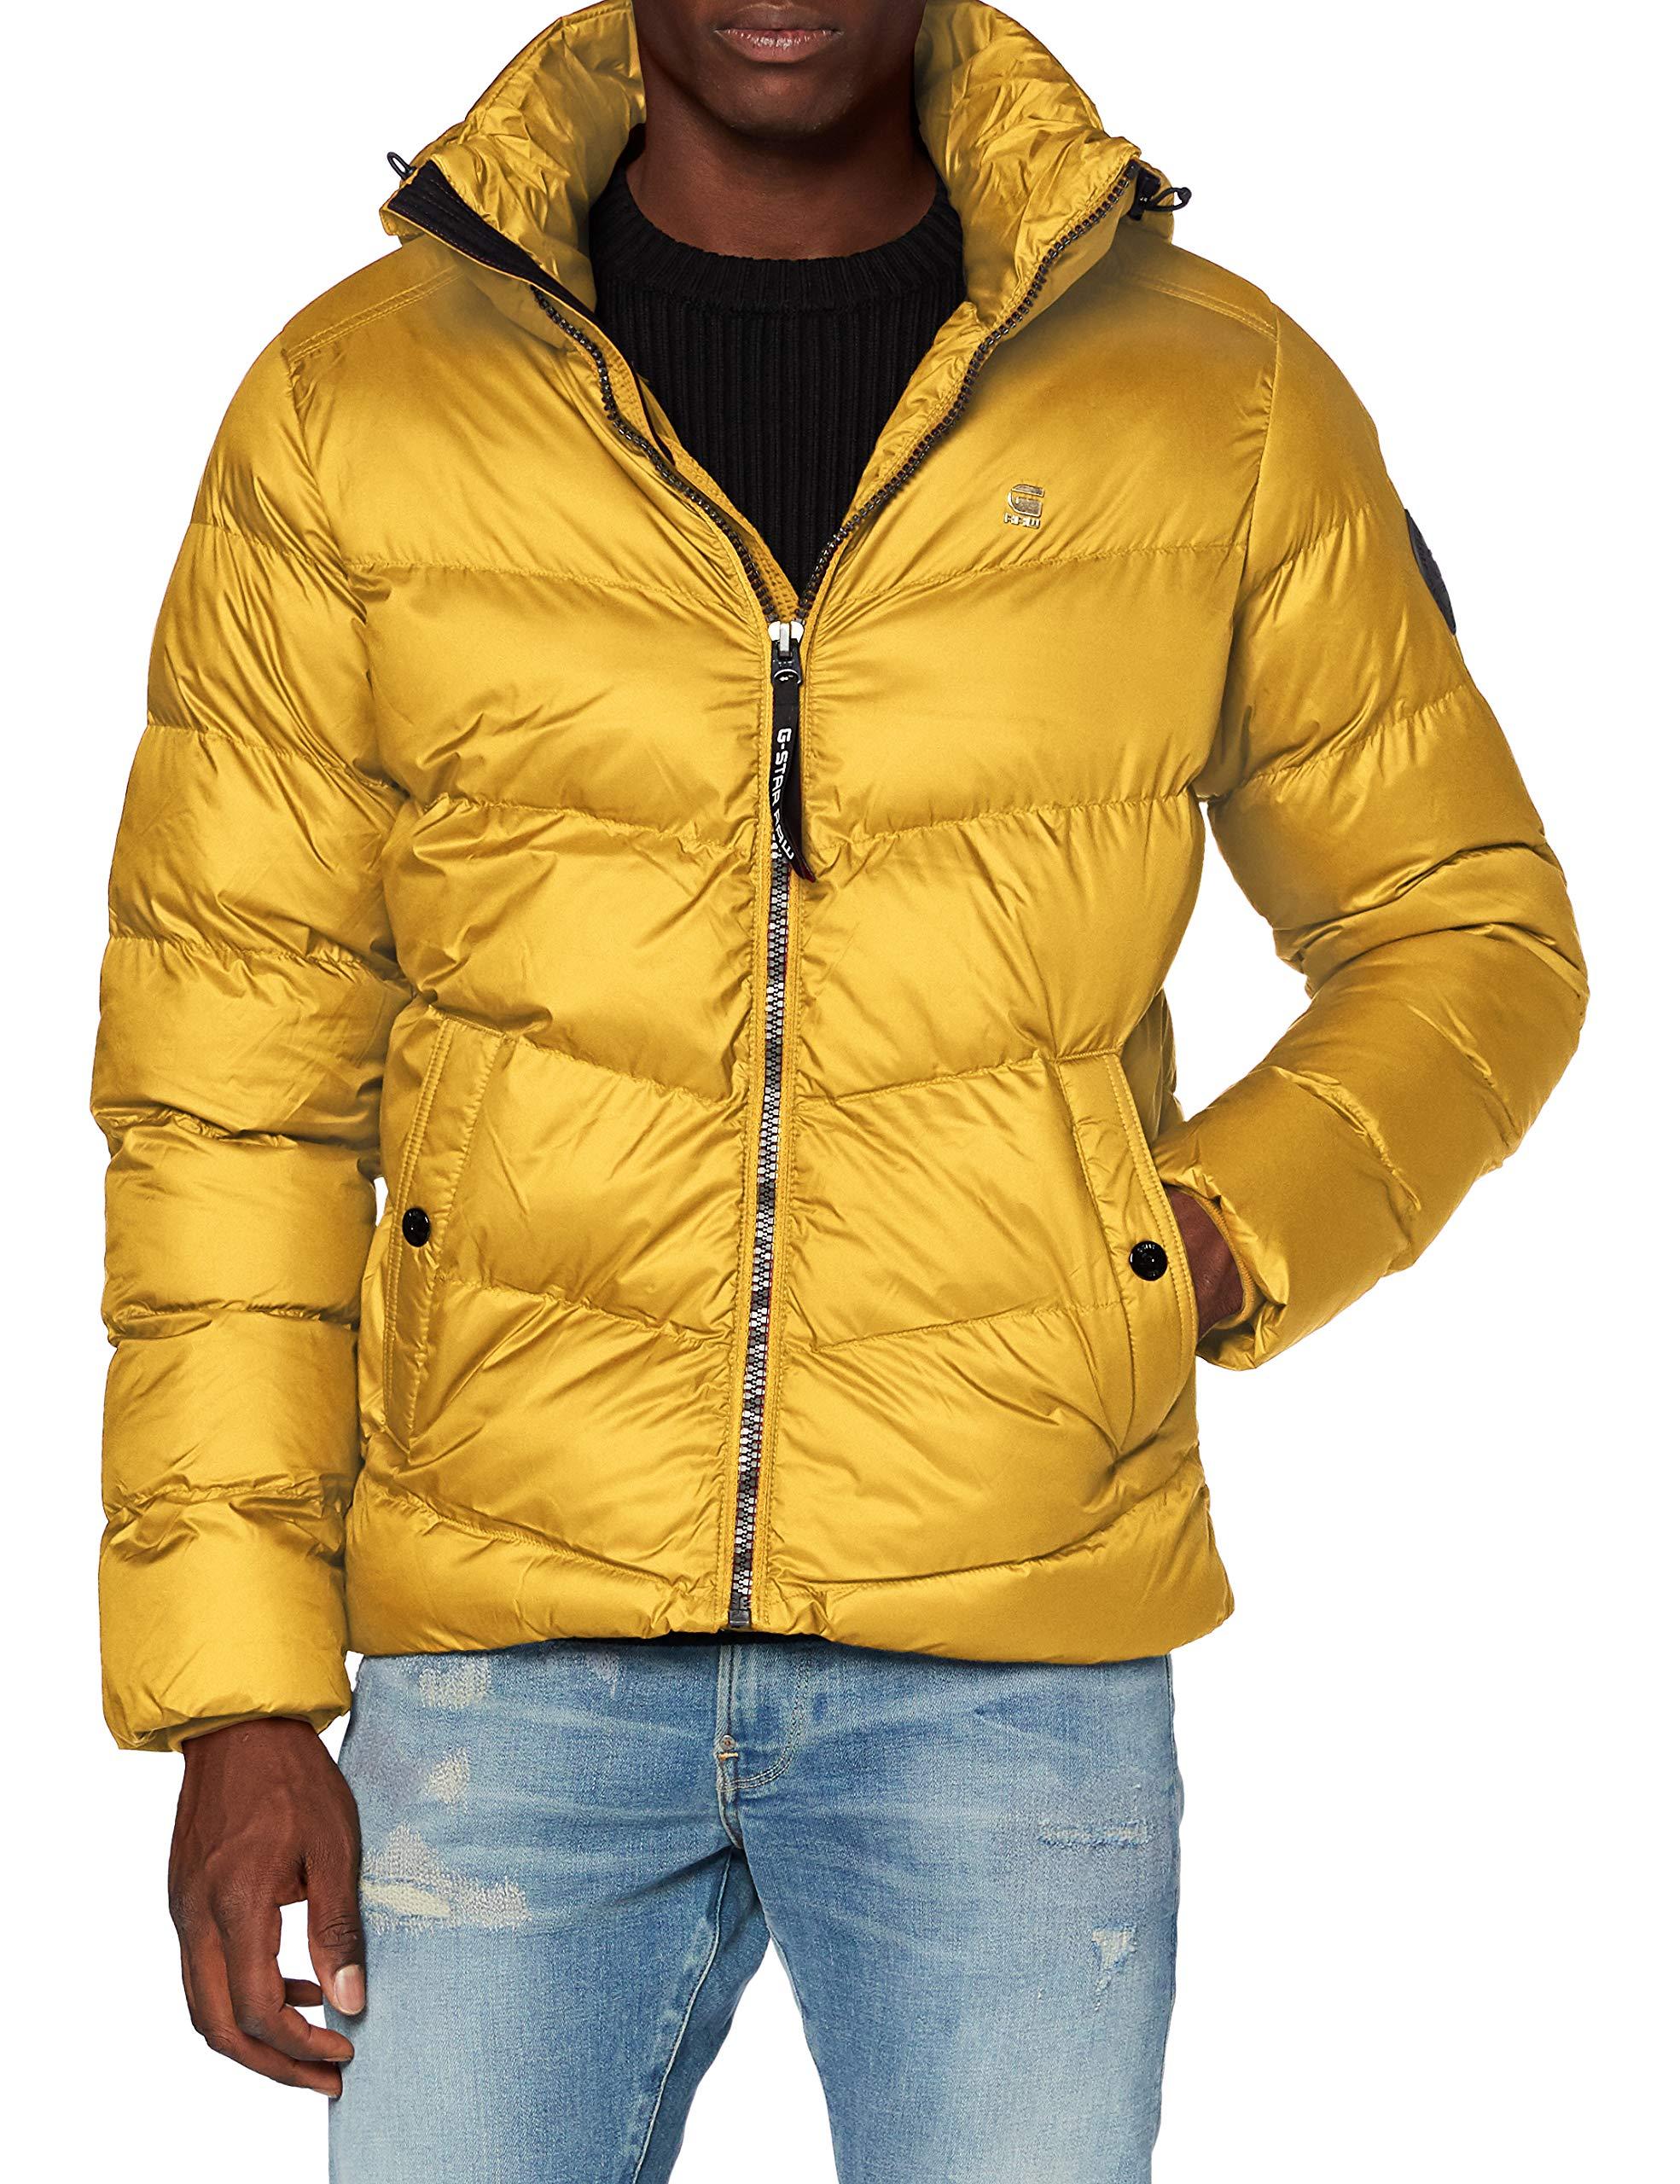 G-Star RAW Whistler Hdd Puffer Jacket in Green Sulphur (Yellow) for Men -  Save 2% | Lyst